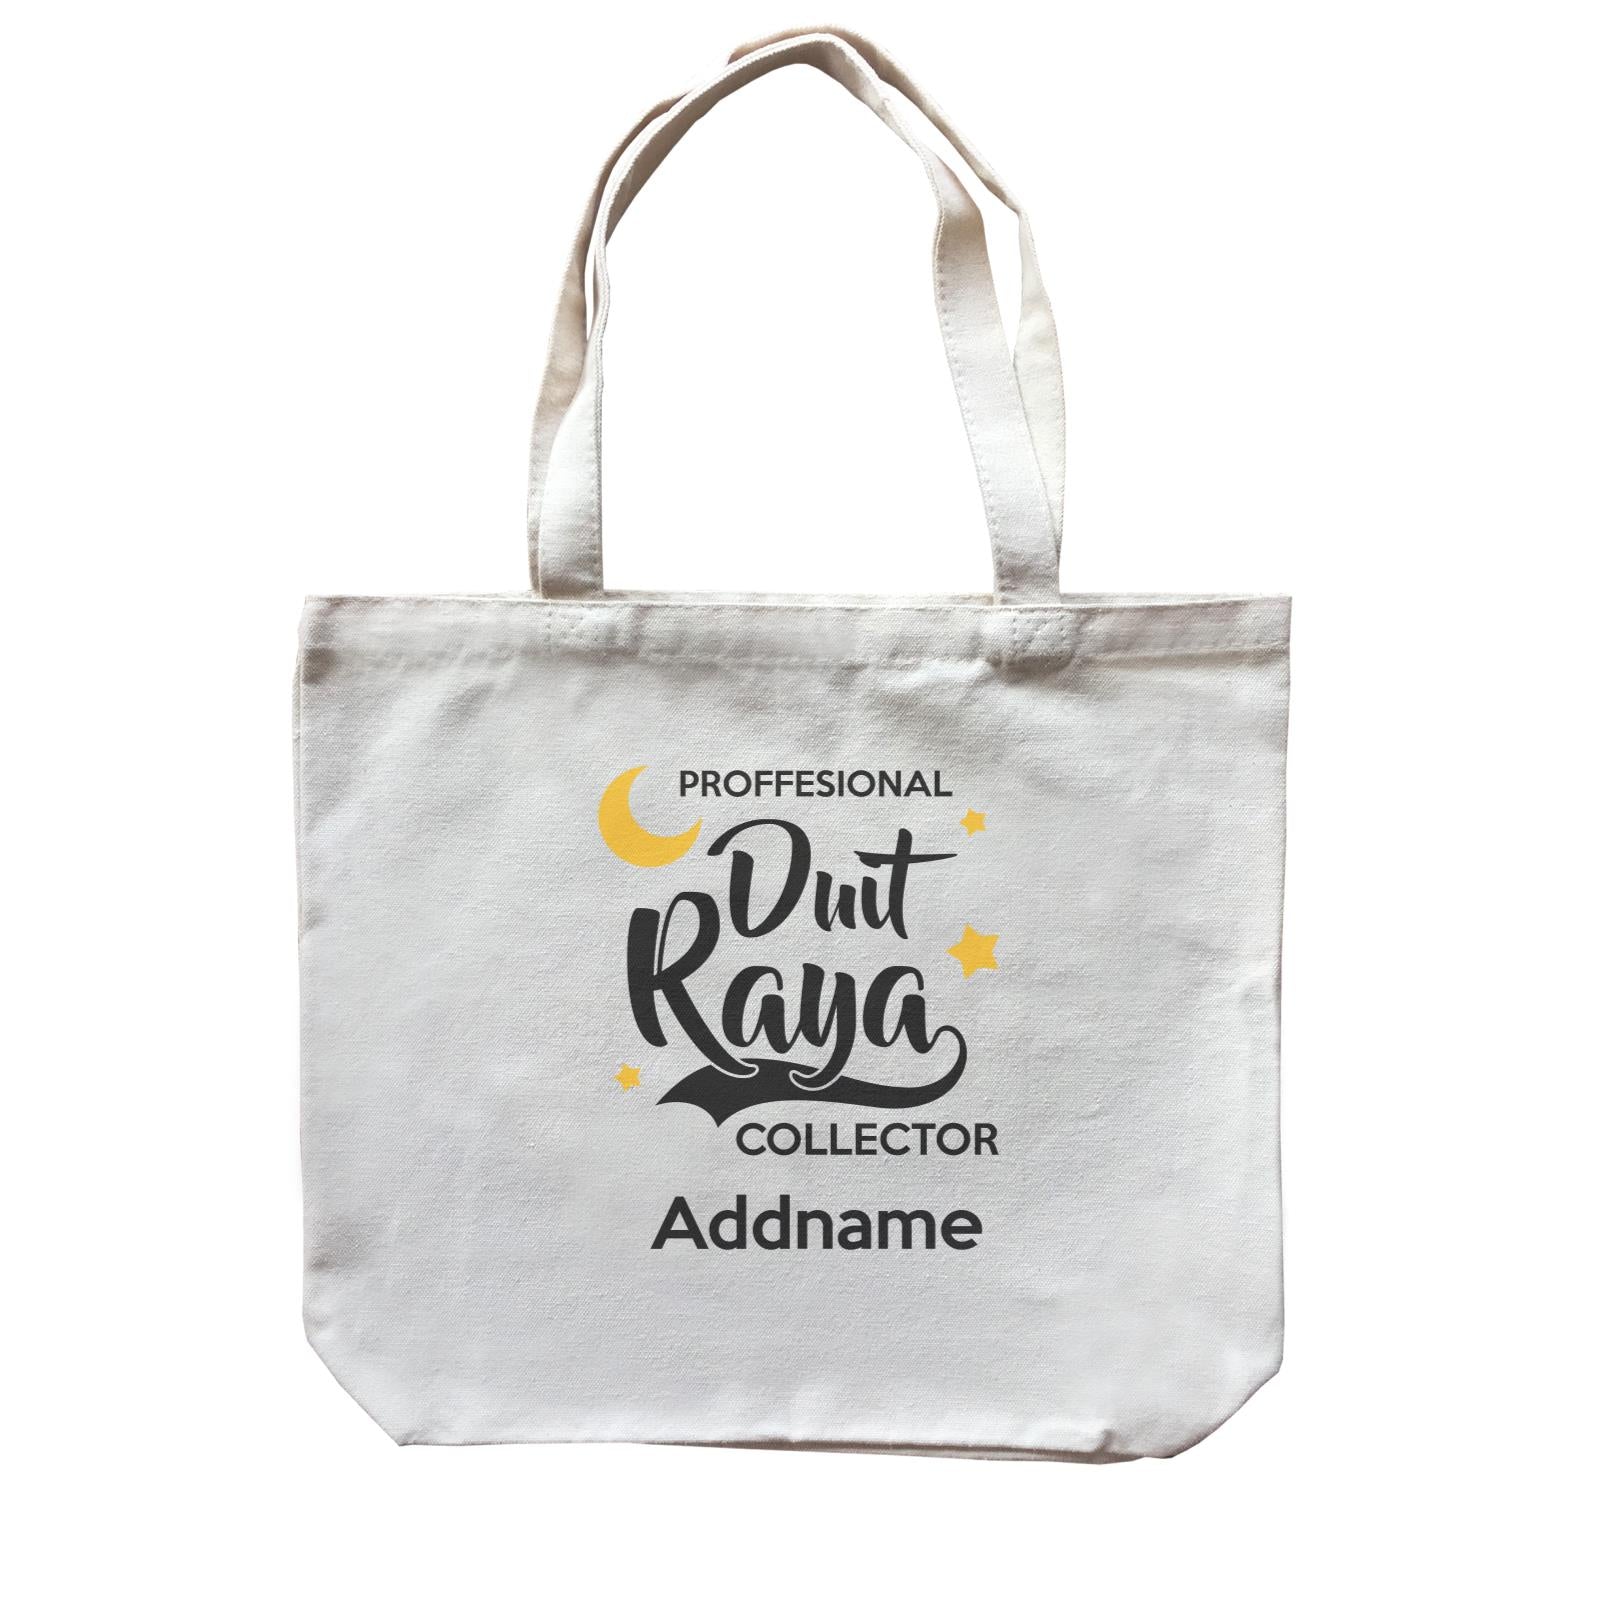 Raya Typography Professional Duit Raya Collector Addname Accessories Canvas Bag